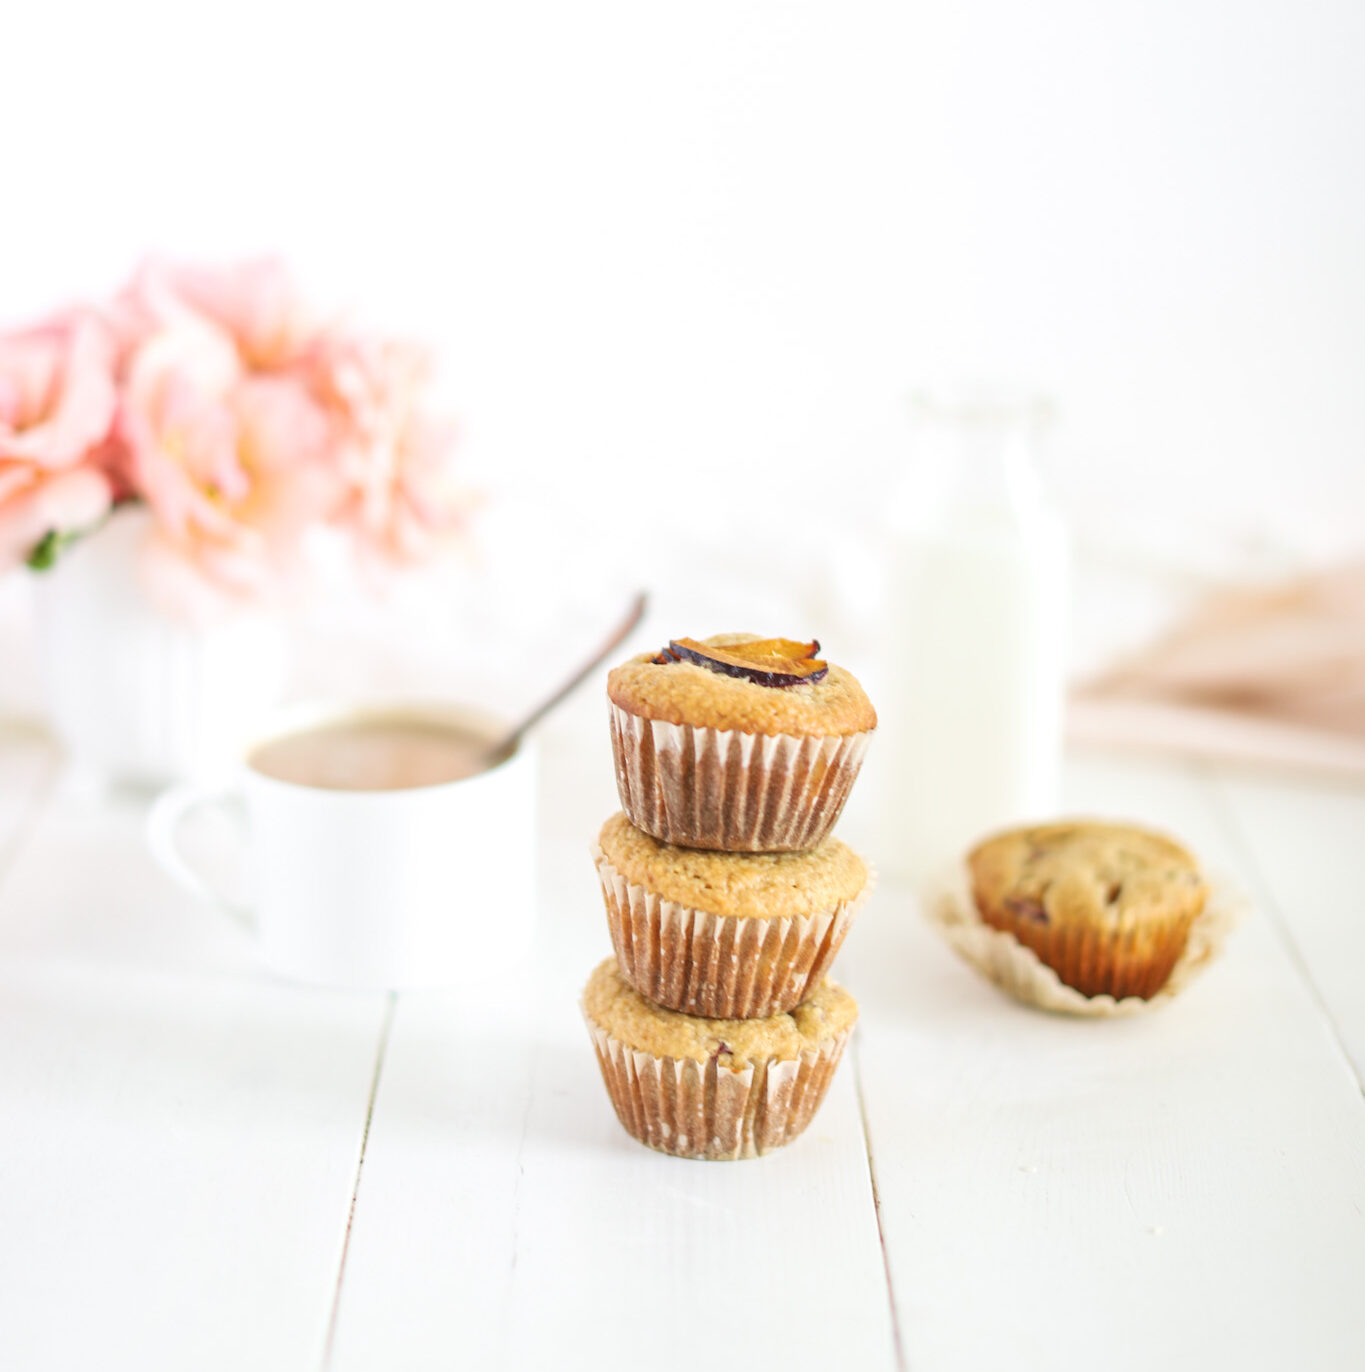 Plum Oat Bran Muffins stacked with cup of milk and flowers